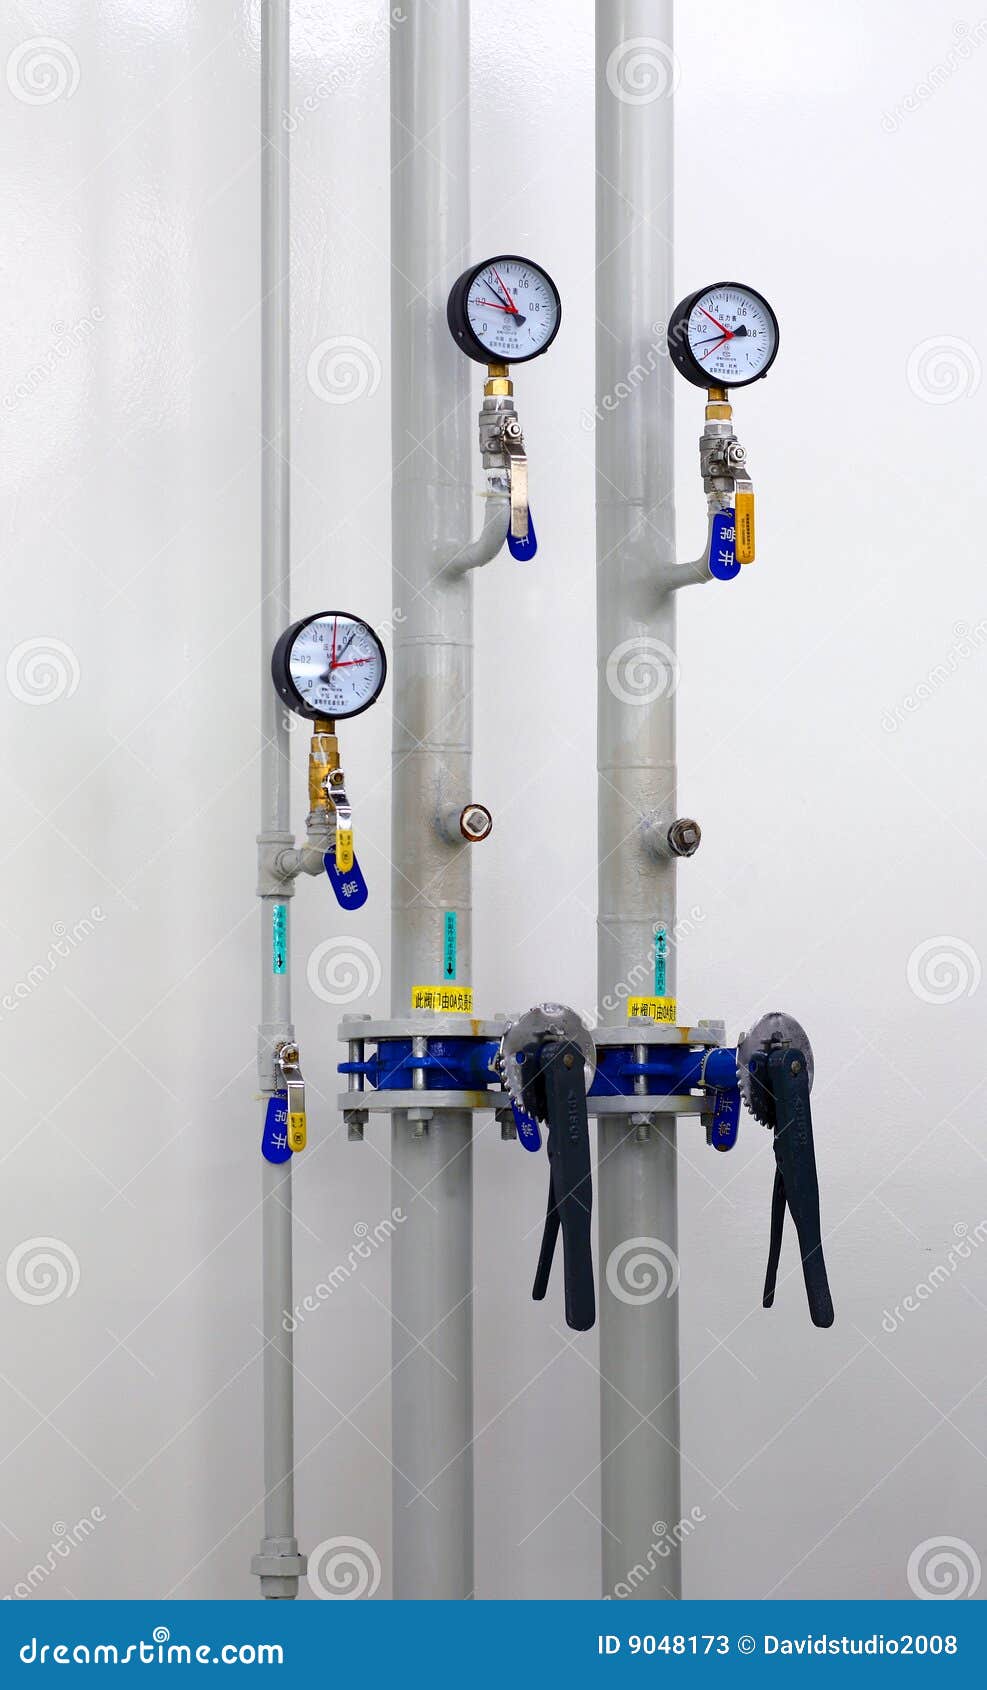 pipes and meters